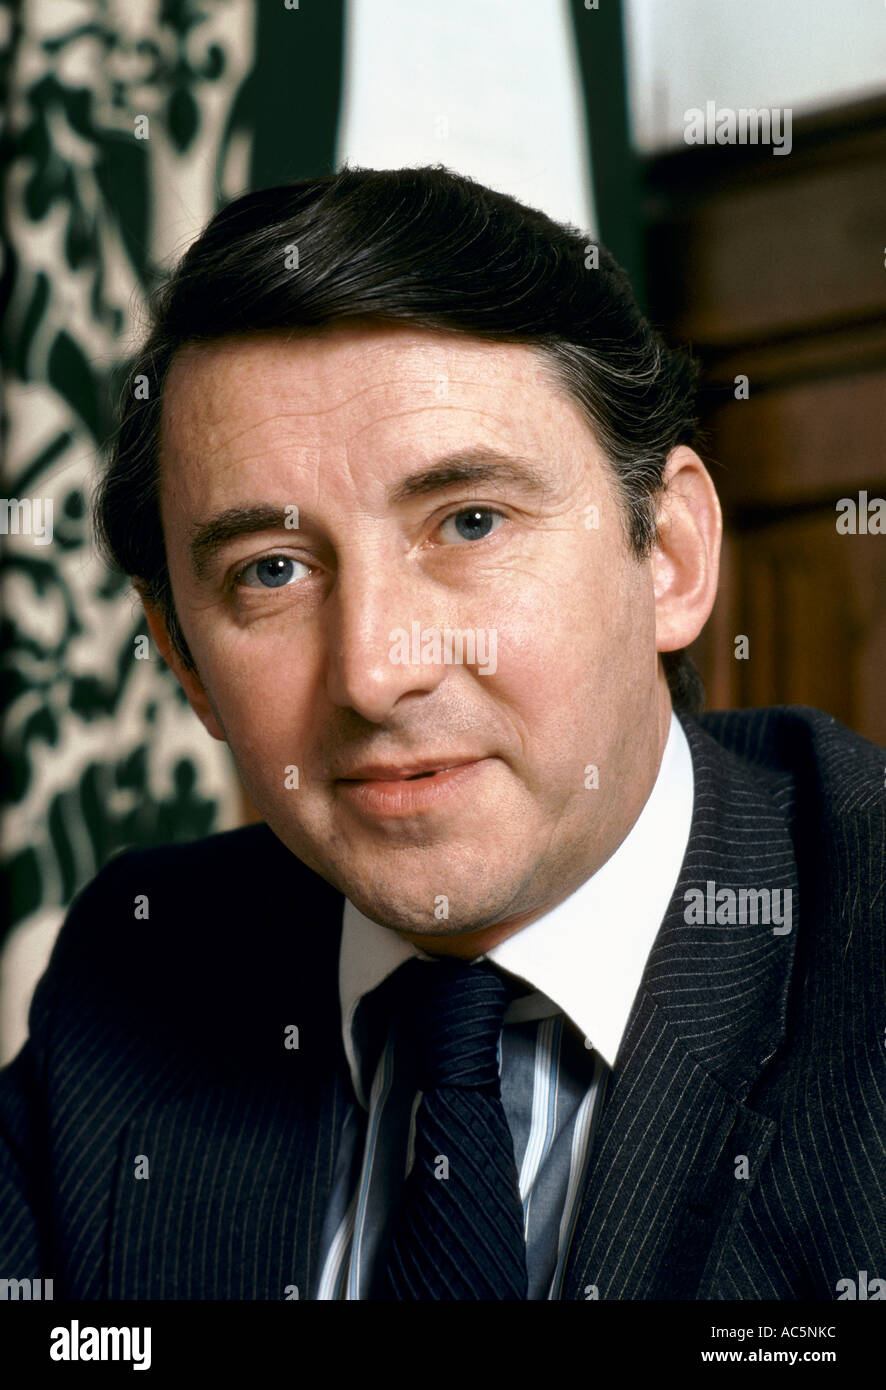 British Scottish politician David Steel Liberal Party Leader in his parliament office Stock Photo